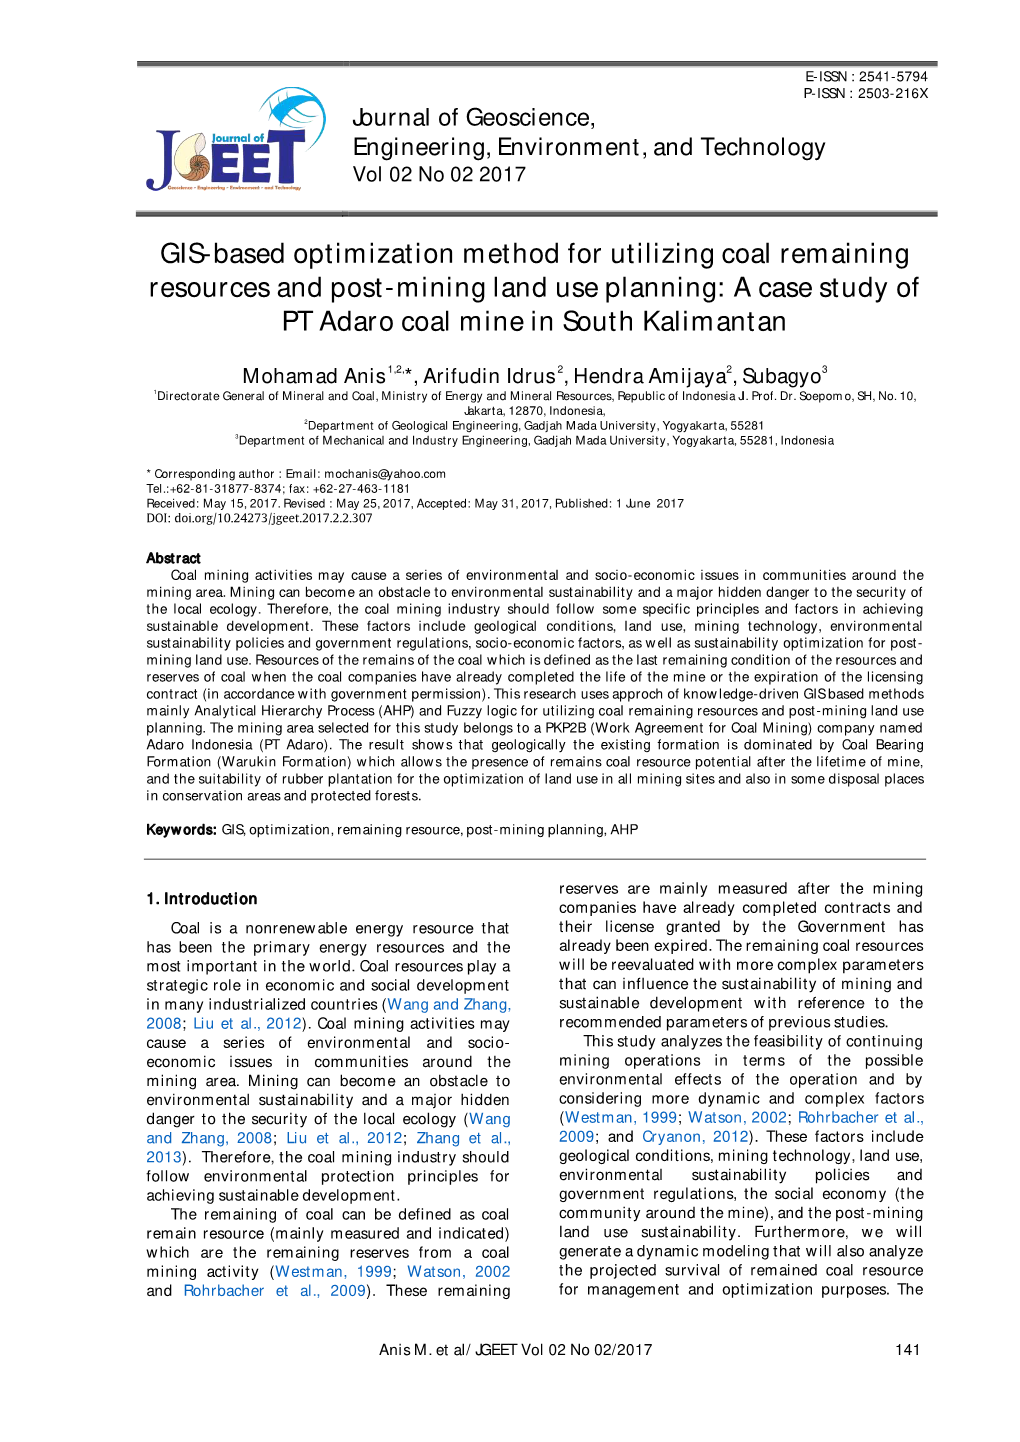 GIS-Based Optimization Method for Utilizing Coal Remaining Resources and Post-Mining Land Use Planning: a Case Study of PT Adaro Coal Mine in South Kalimantan